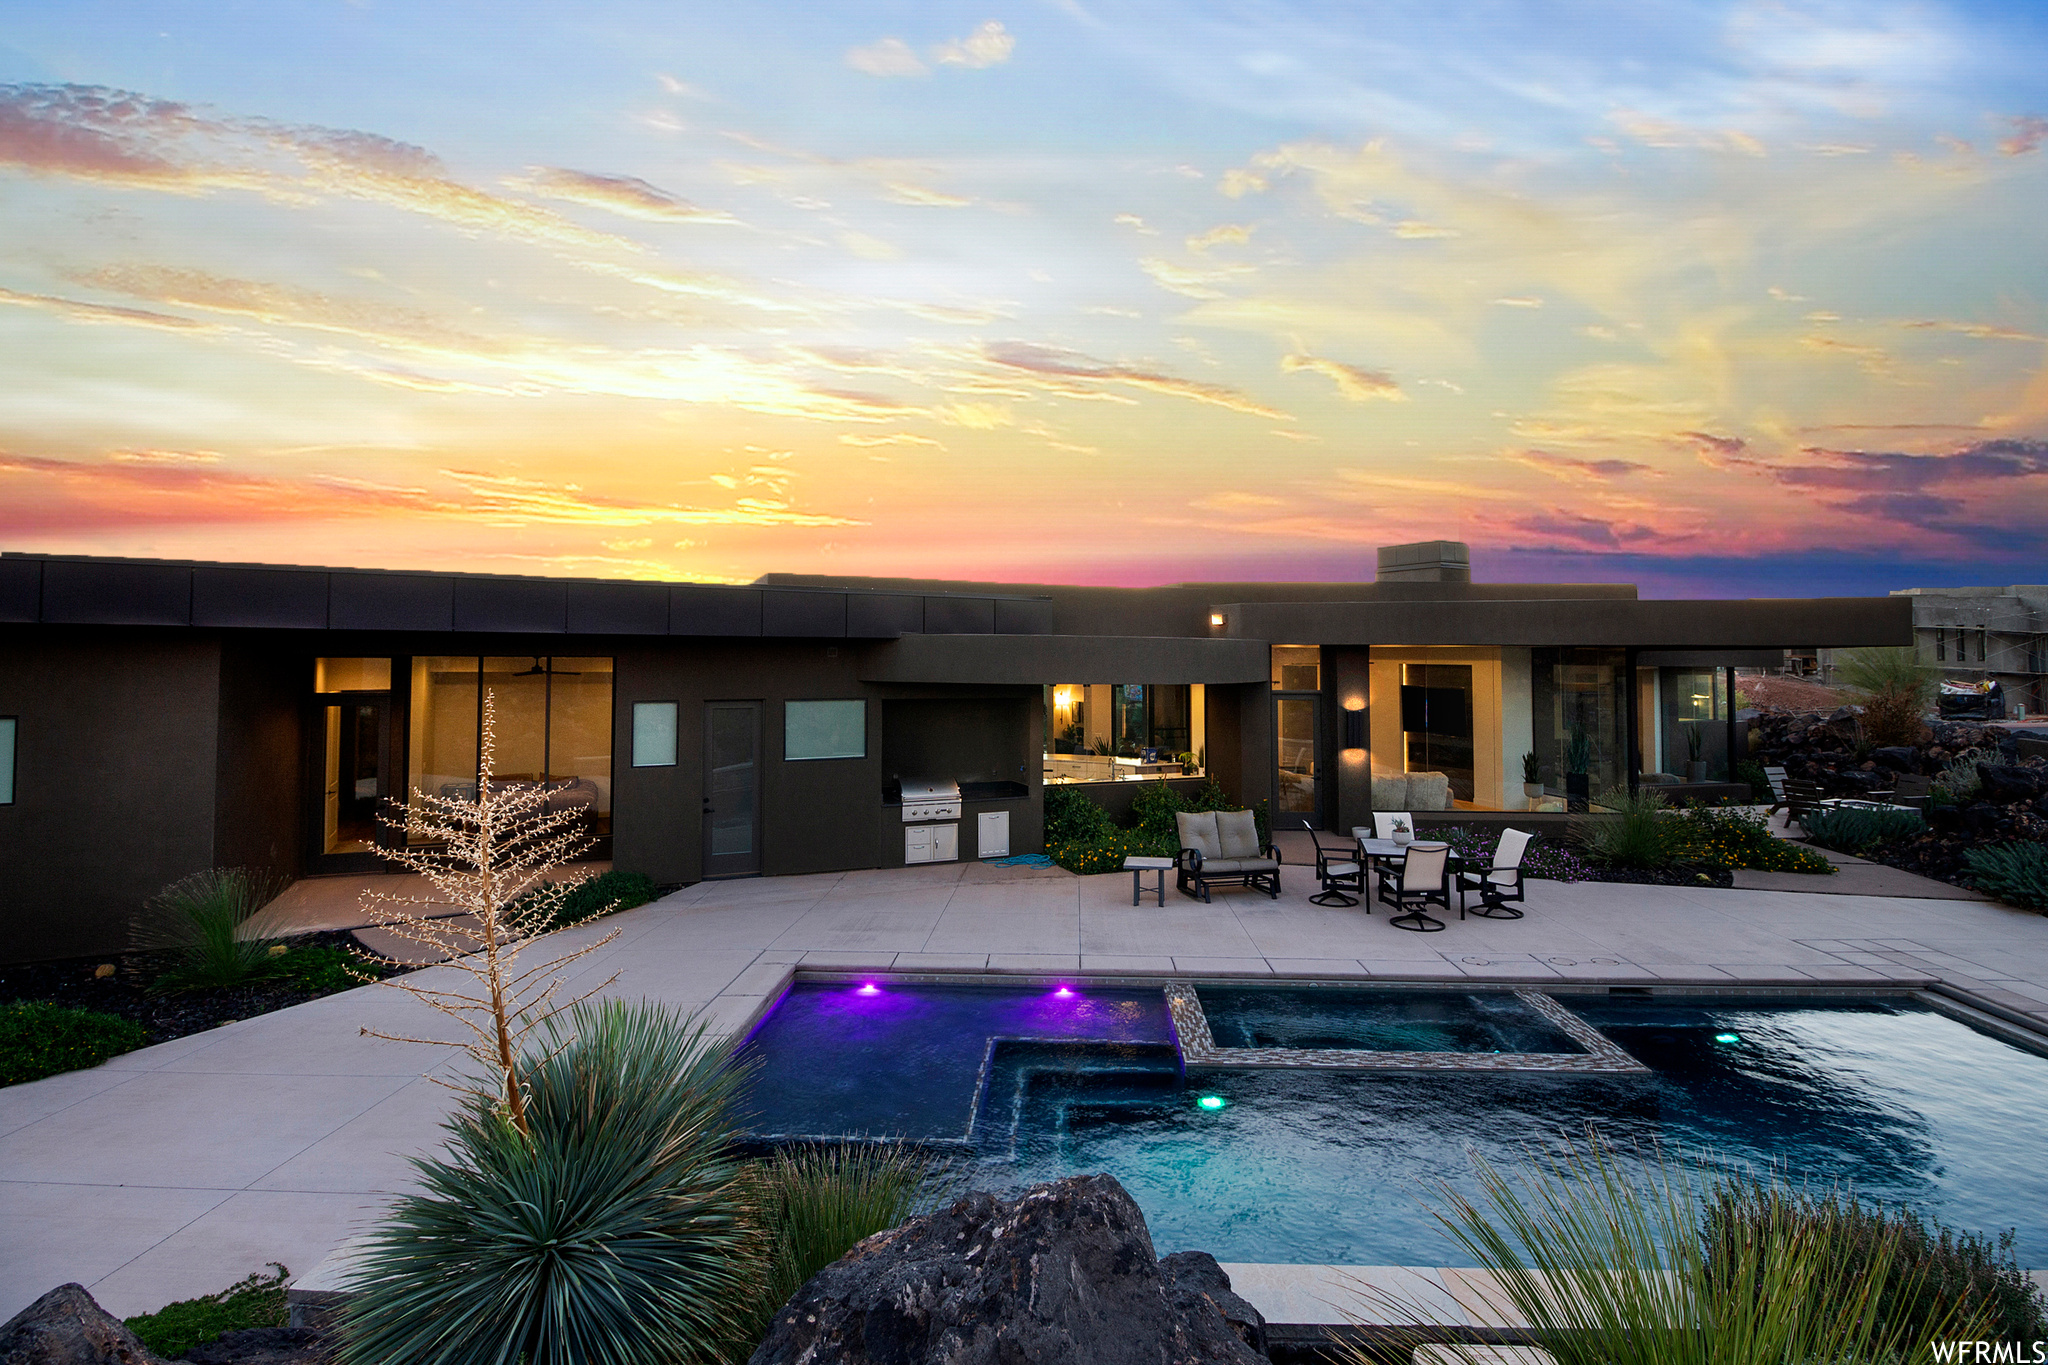 Pool at dusk featuring an outdoor kitchen, a patio area, and area for grilling